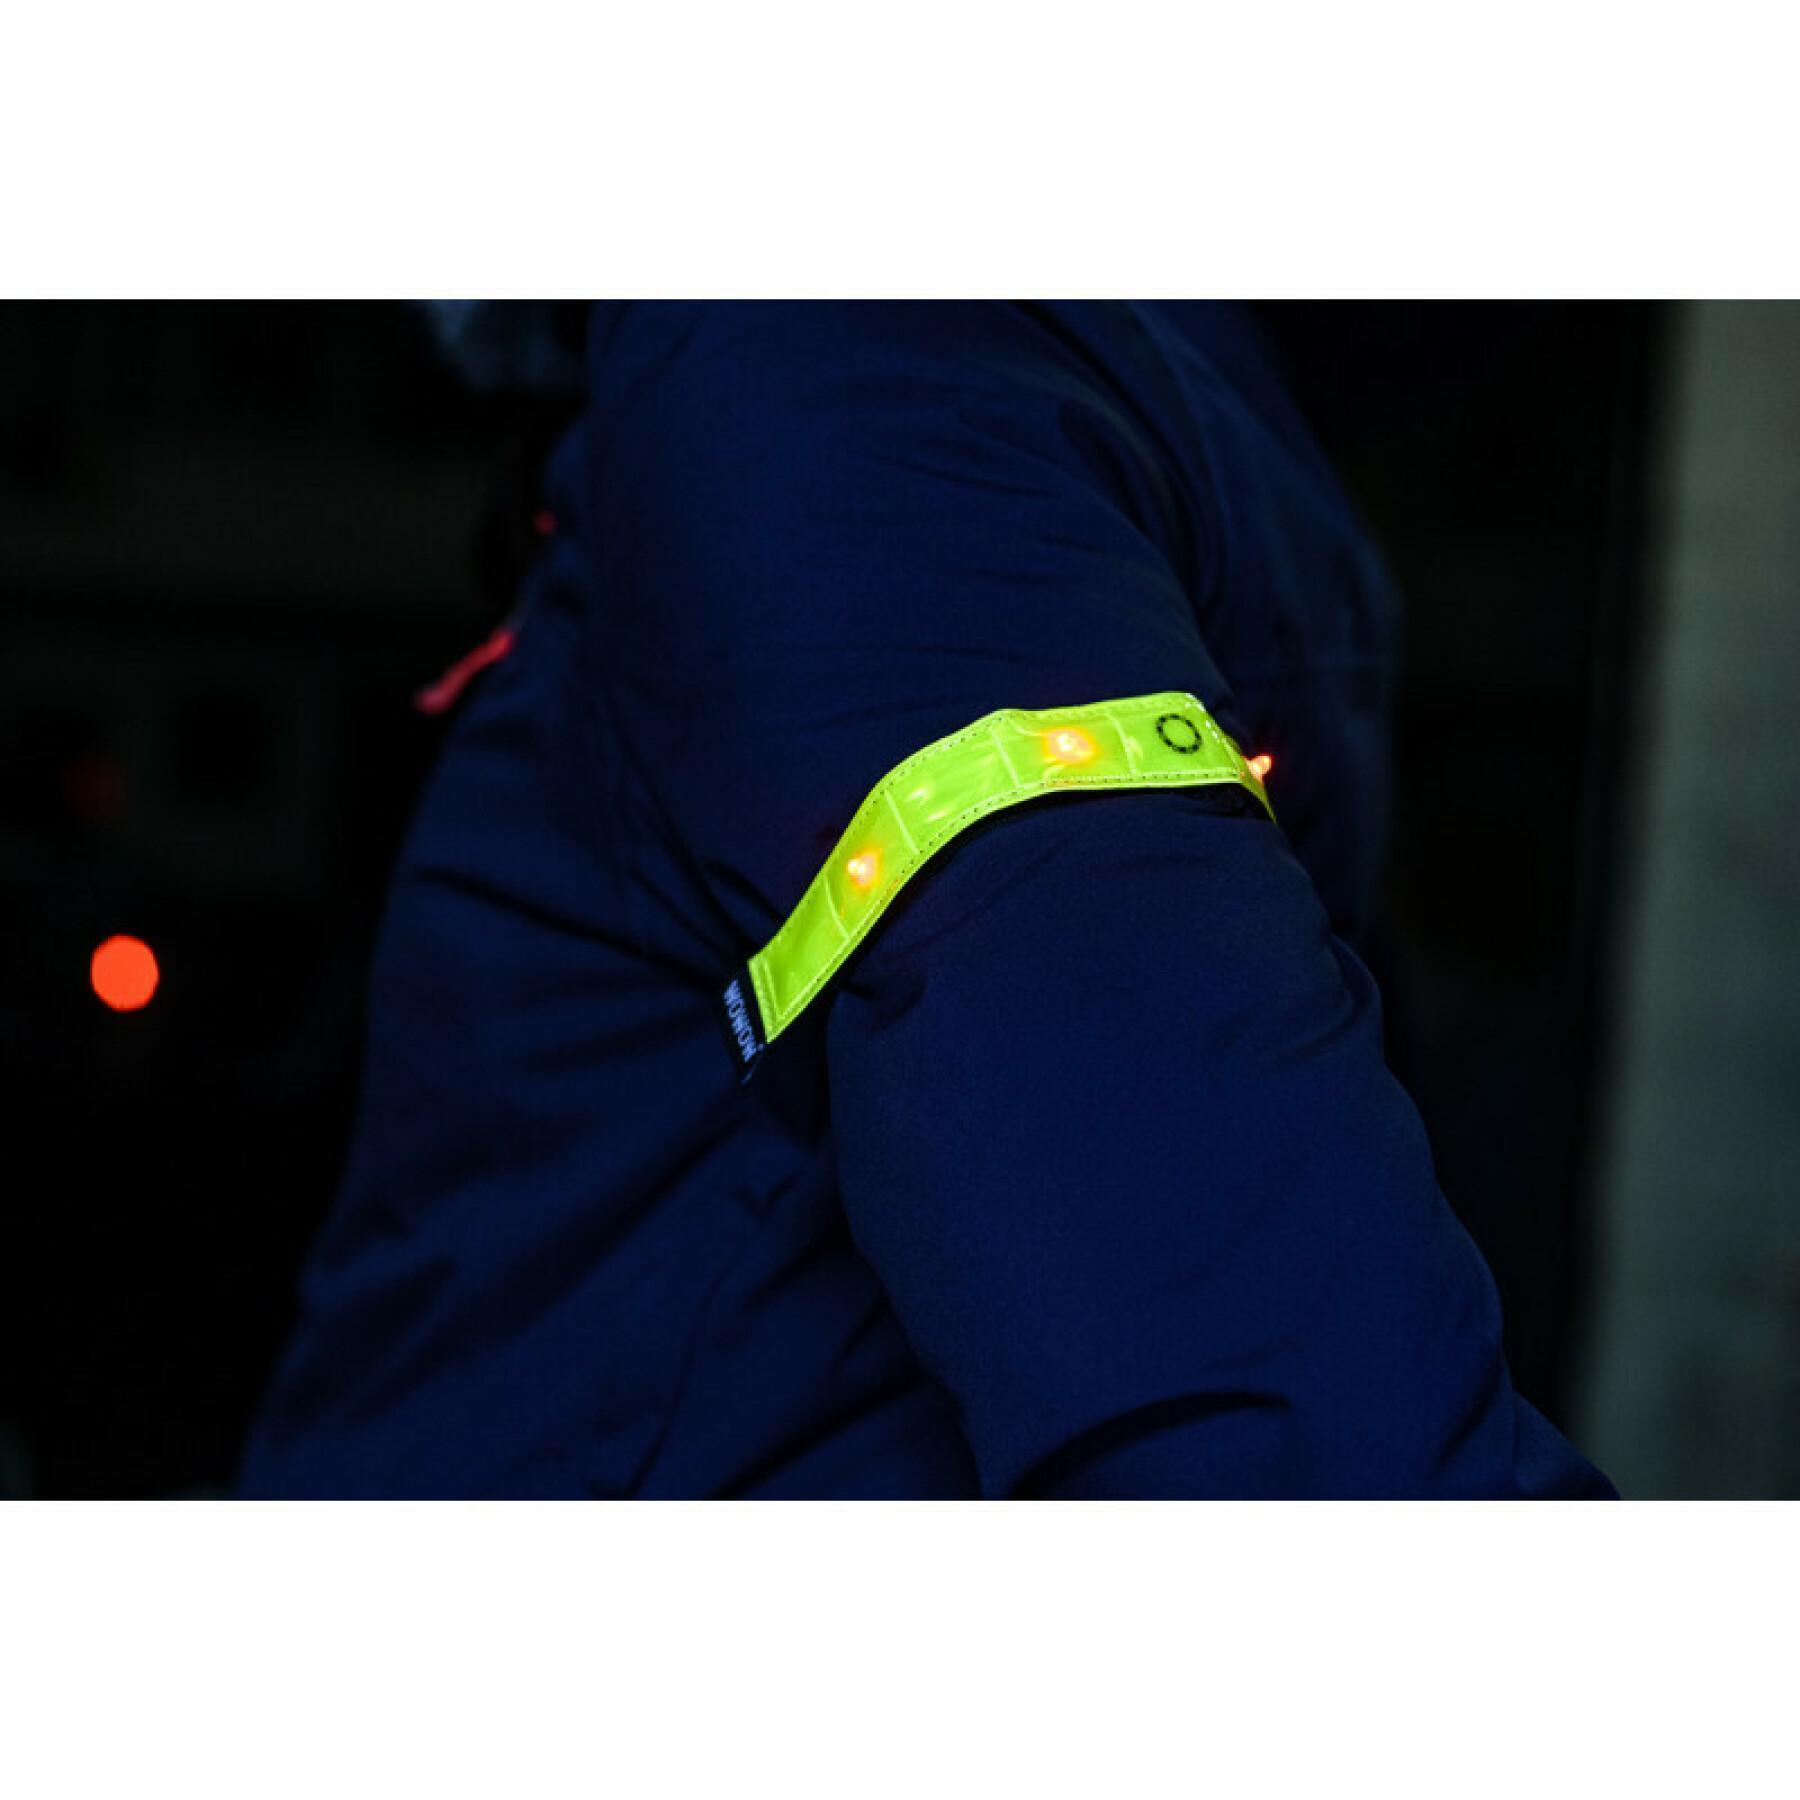 Reflective armband with red led Wowow